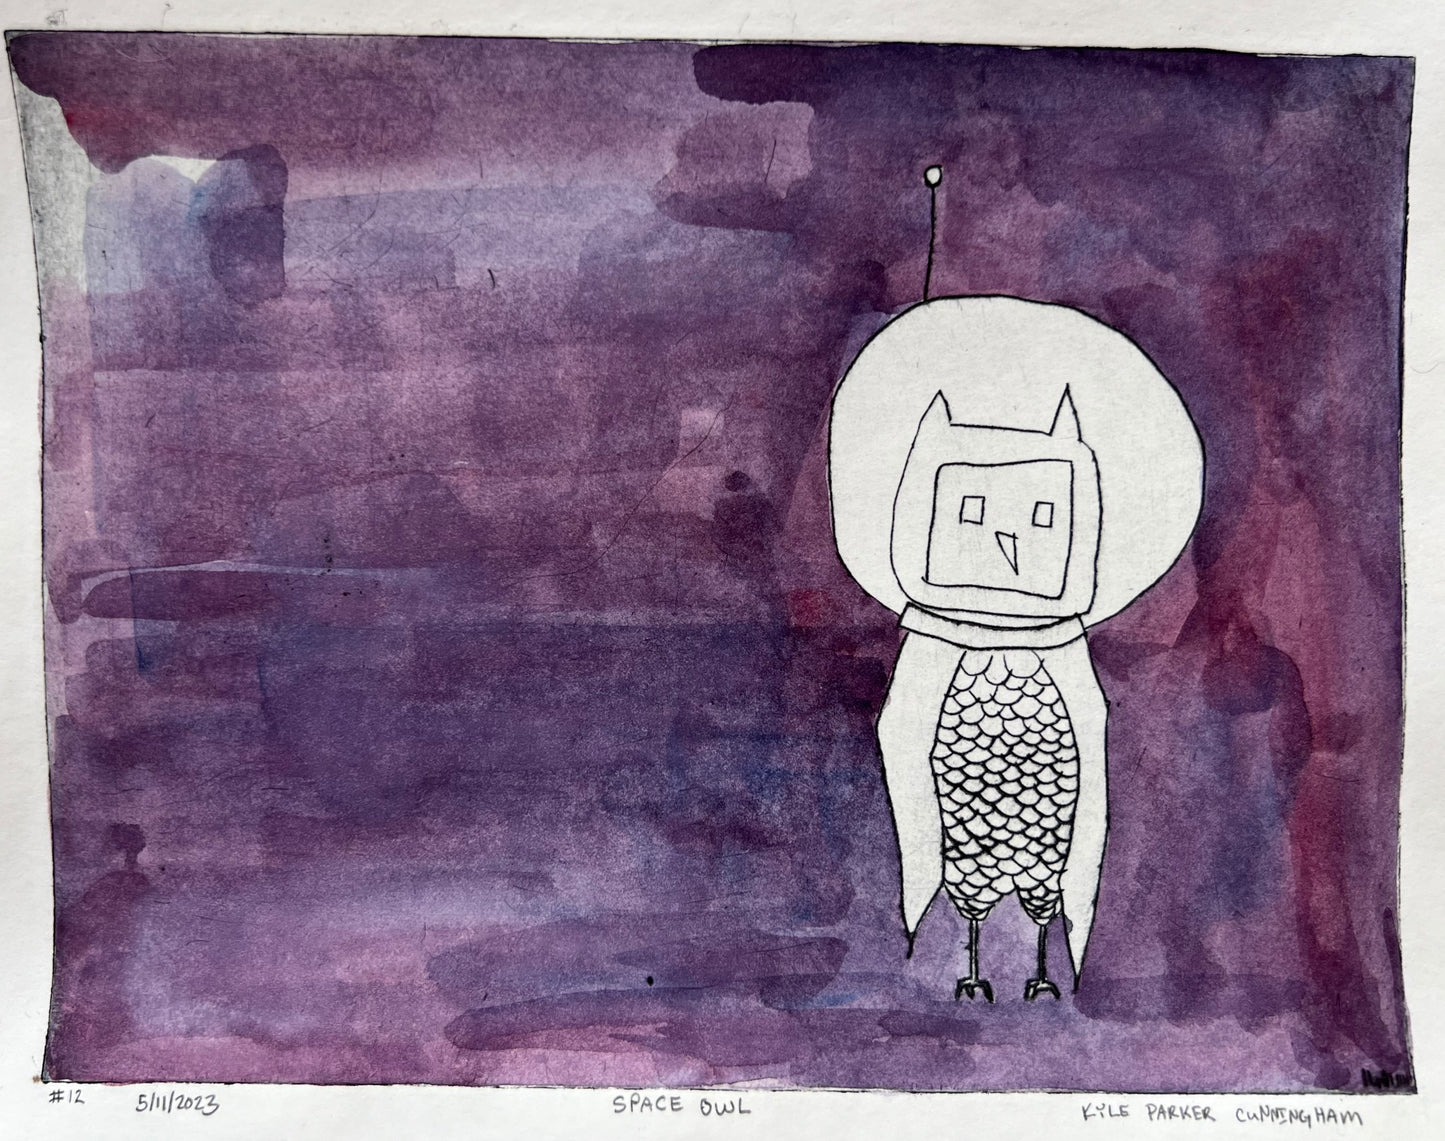 Space Owl No. 12 -Drypoint Print by Kyle Parker Cunningham